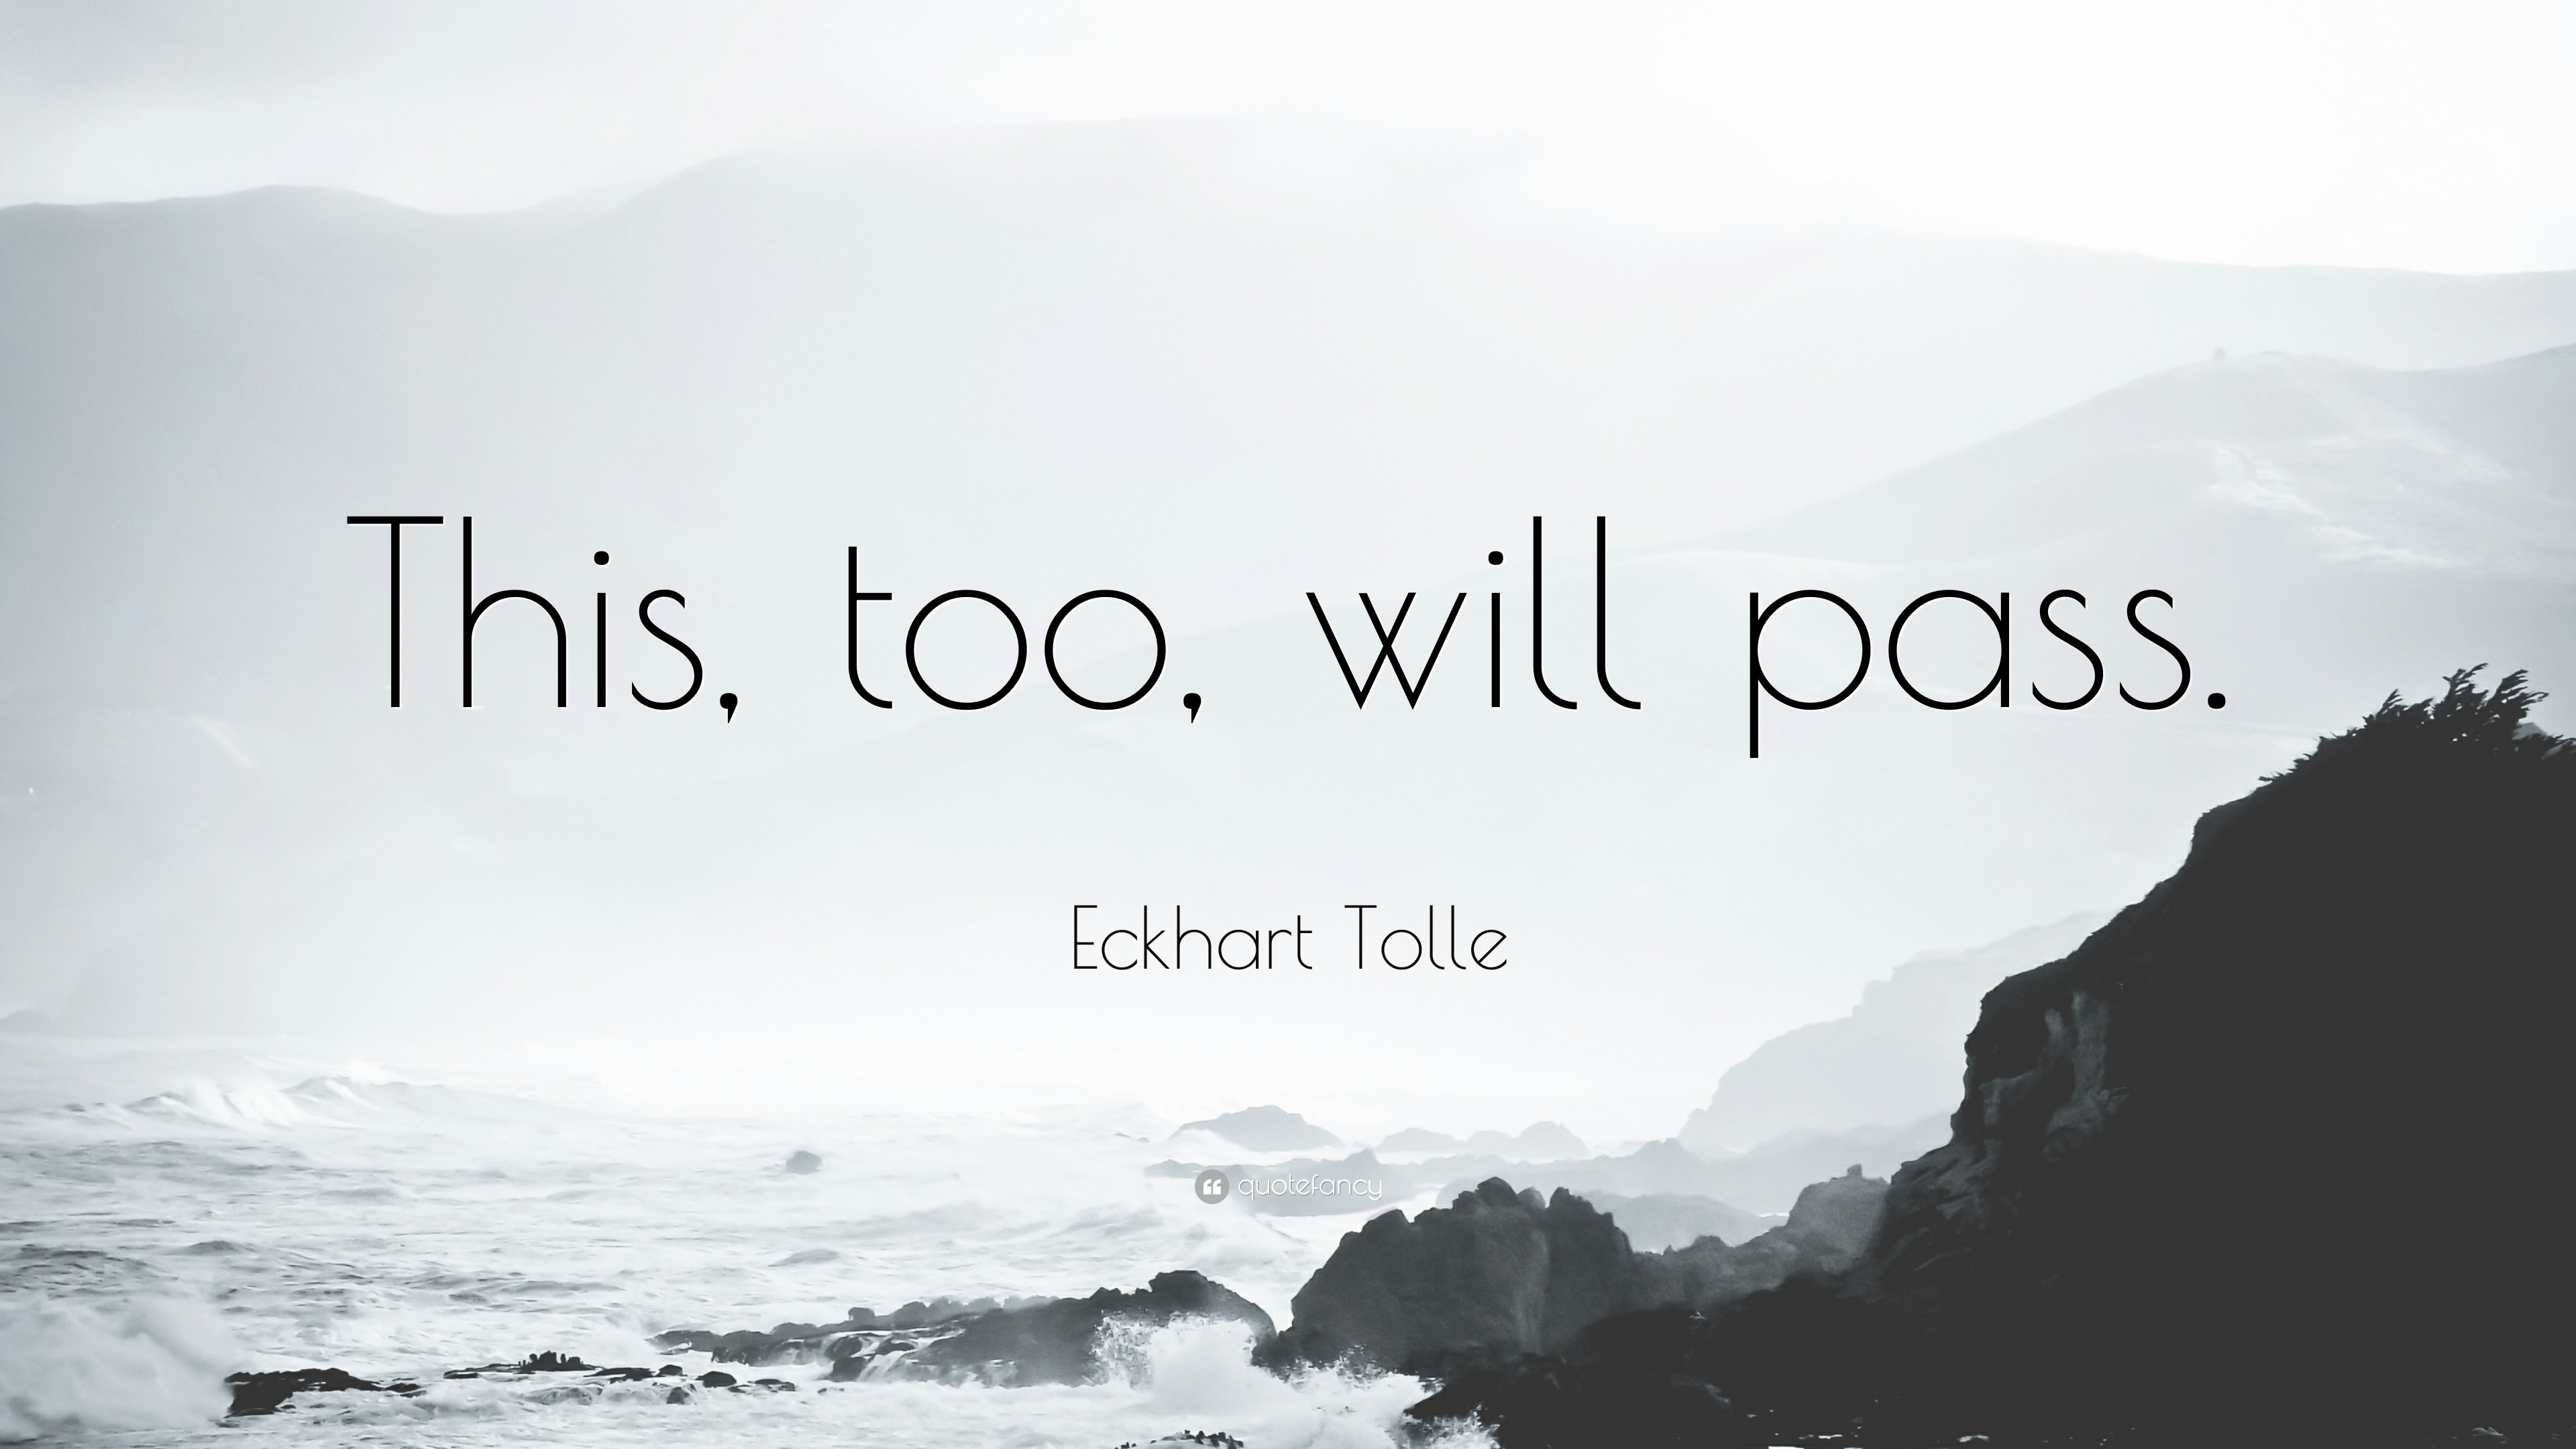 Eckhart Tolle Quote: “This, too, will pass.”